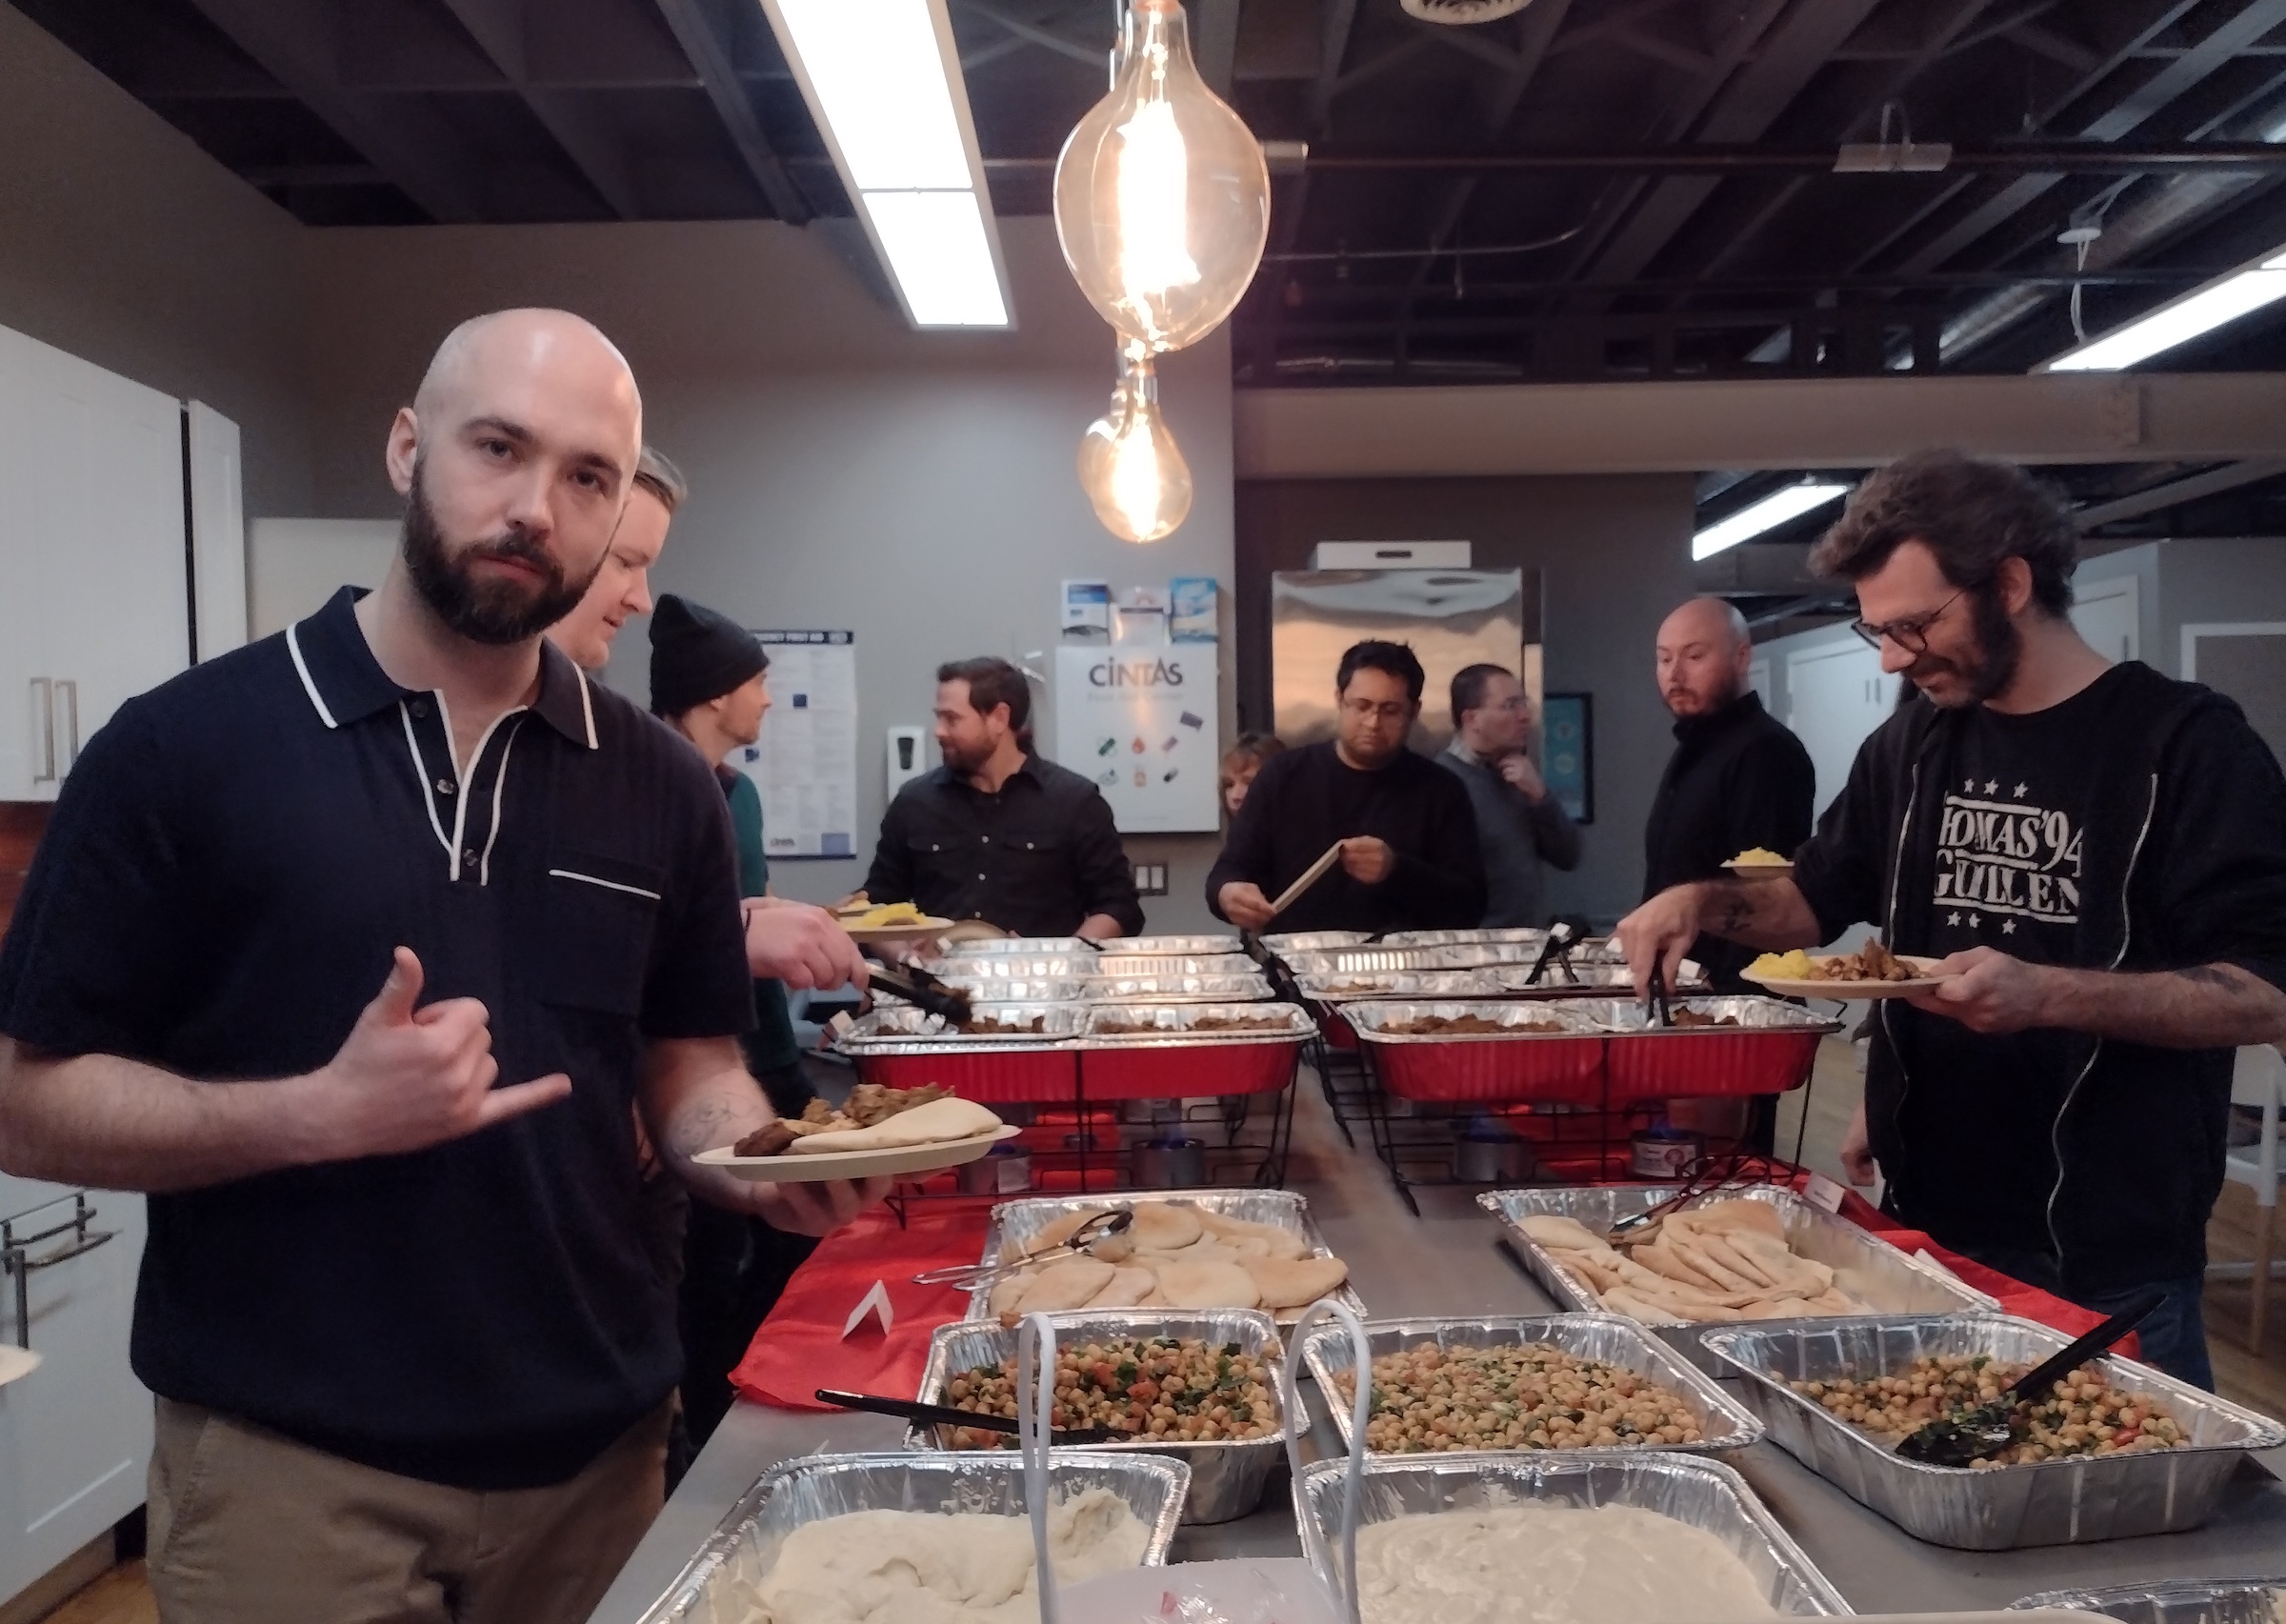 Reverb colleagues getting food from a buffet setup in the office kitchen